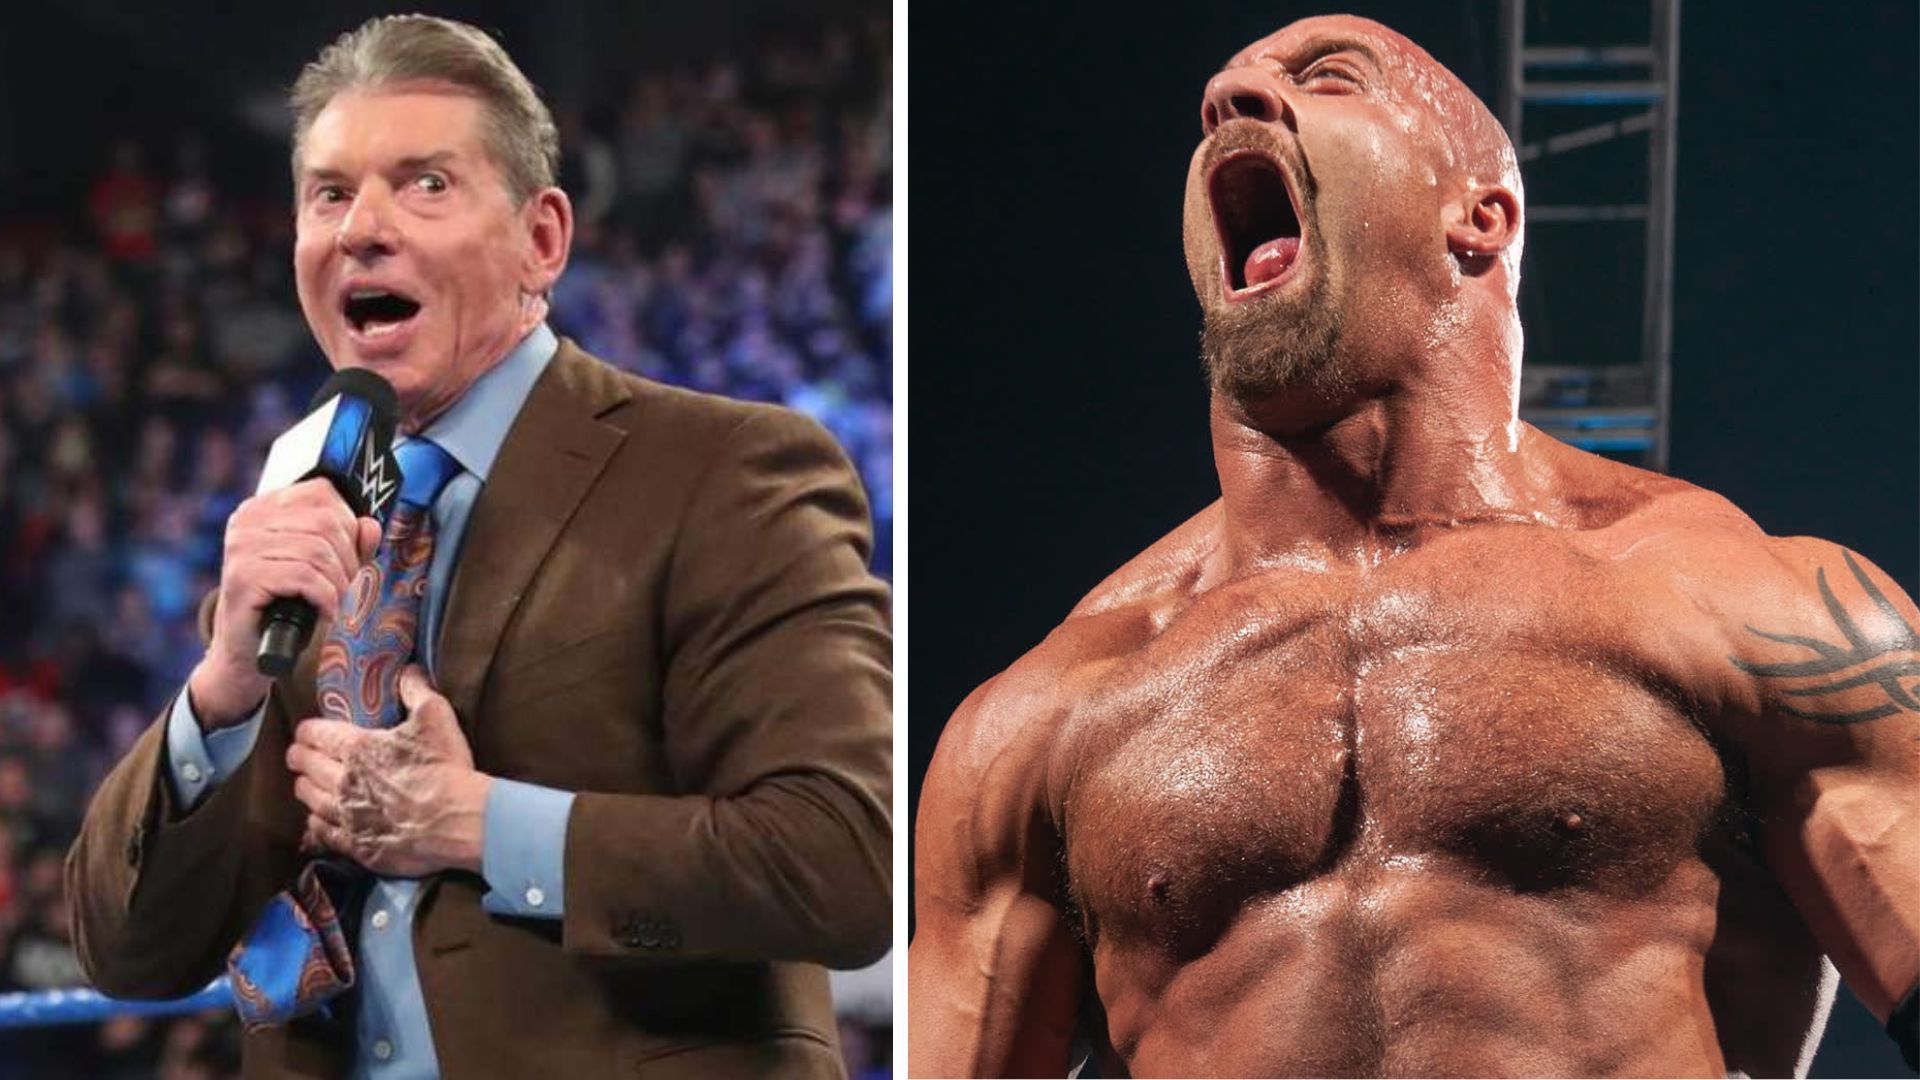 Vince McMahon has returned to the WWE after departing in July. 